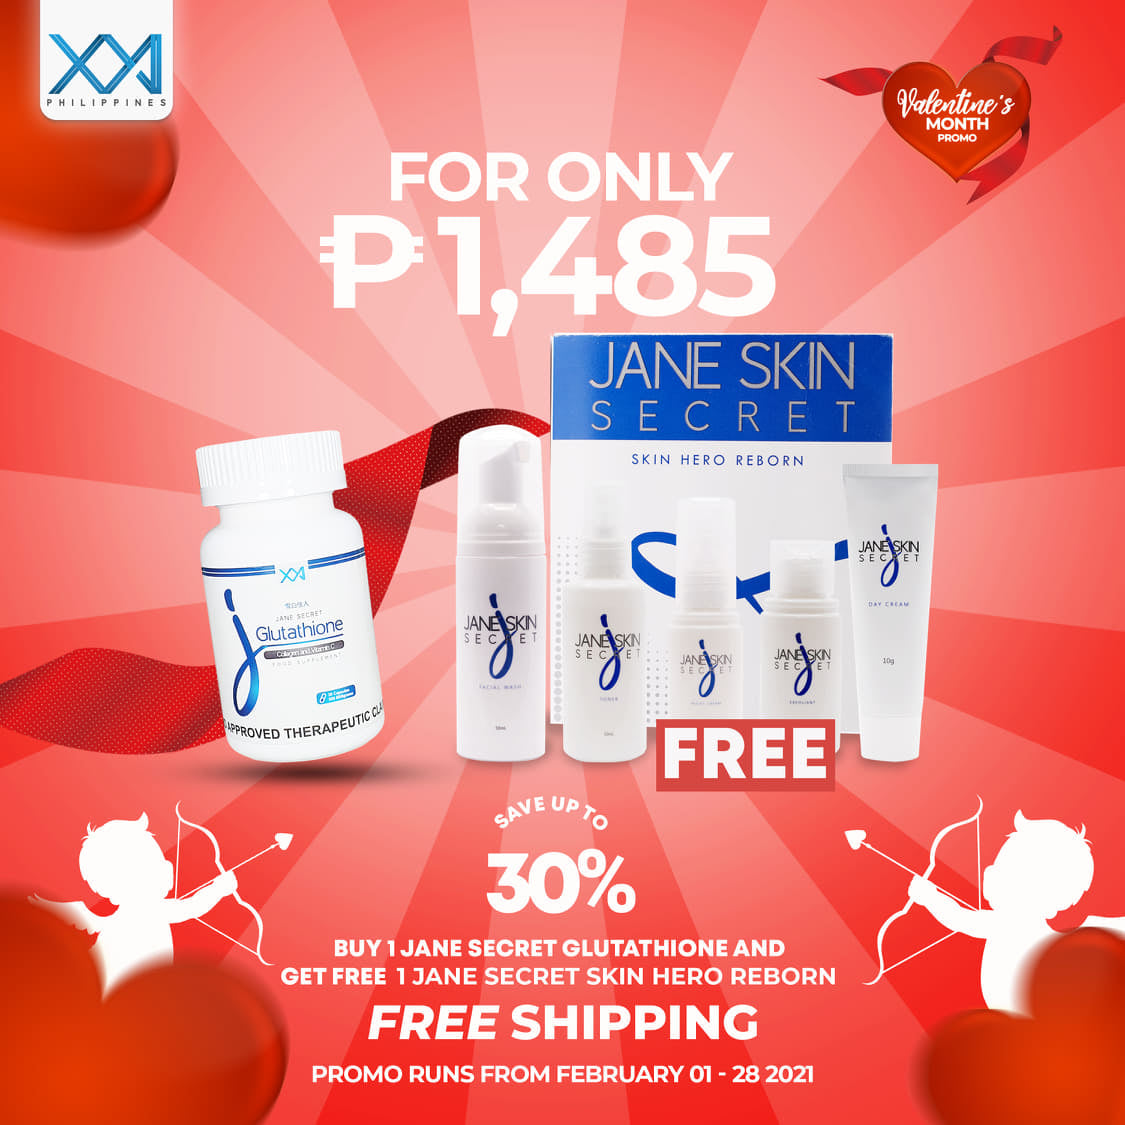 JANE SECRET GLUTATHIONE - 100% AUTHENTIC CASH ON DELIVERY